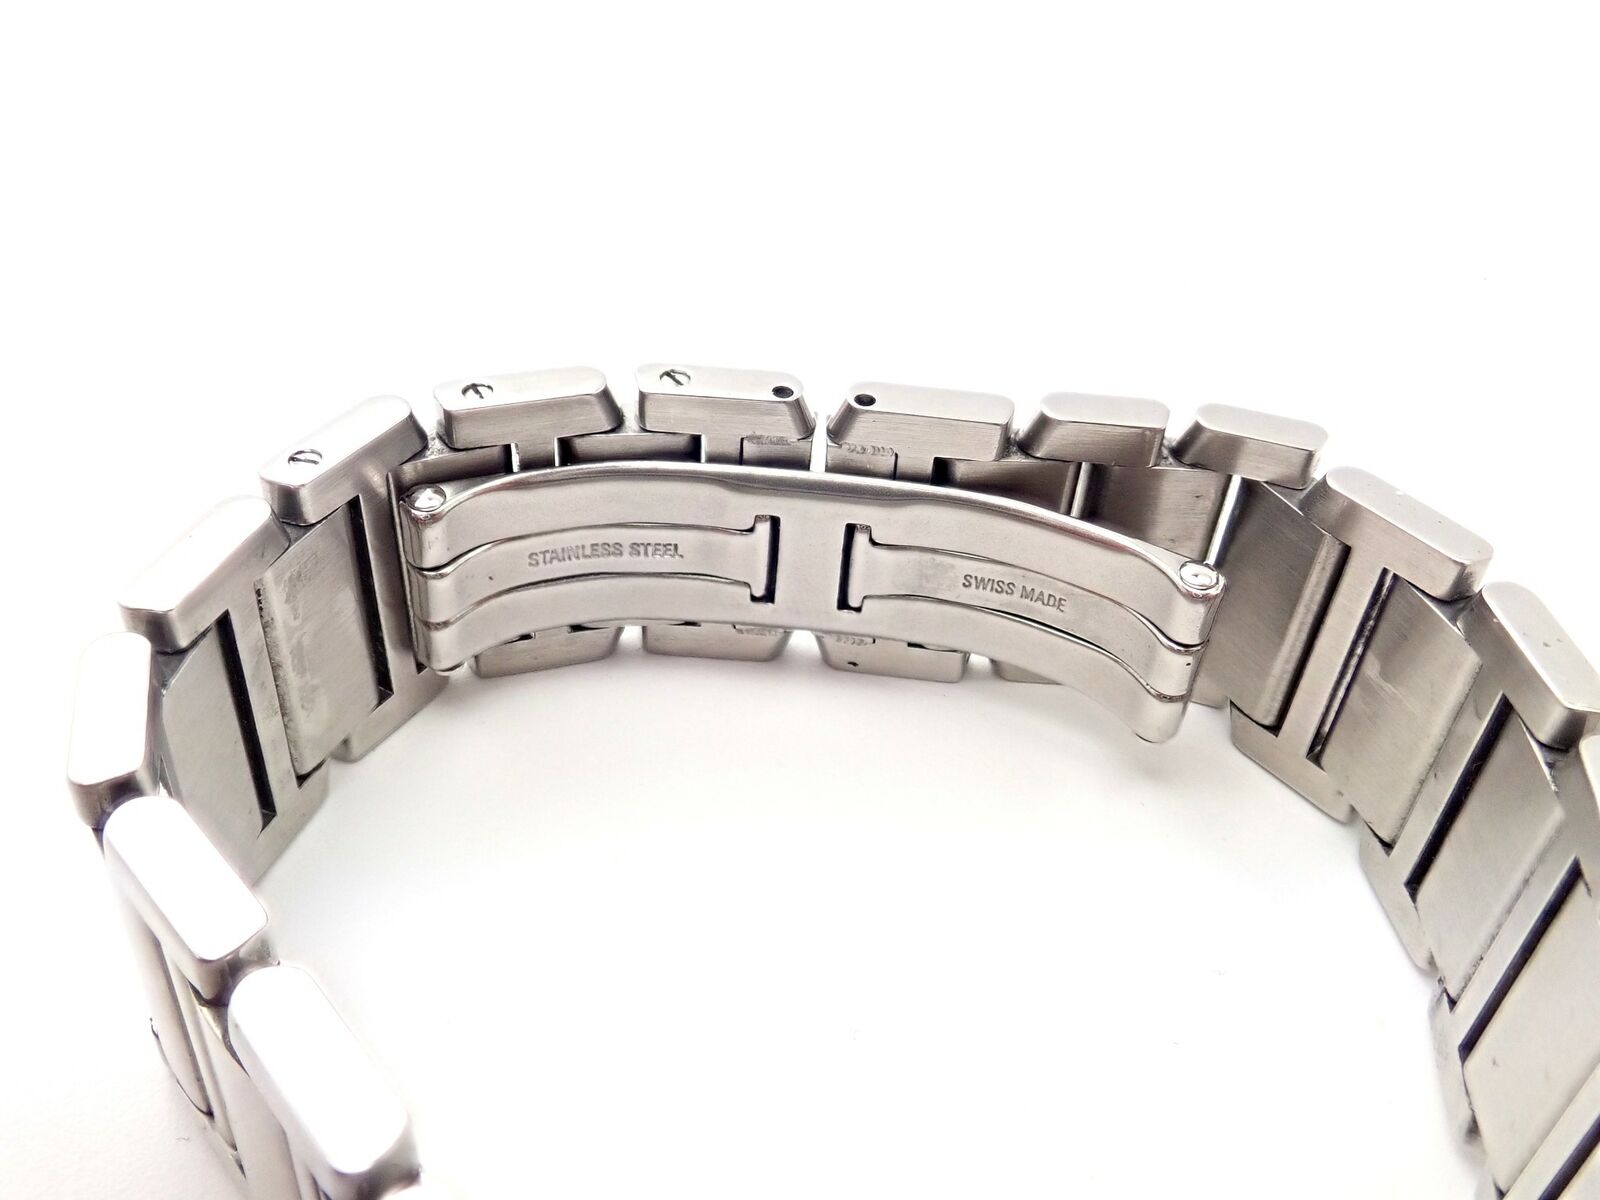 Cartier Jewelry & Watches:Watches, Parts & Accessories:Watches:Wristwatches Authentic! Cartier Stainless Steel Ladies Tank Francaise Quartz Watch 2465